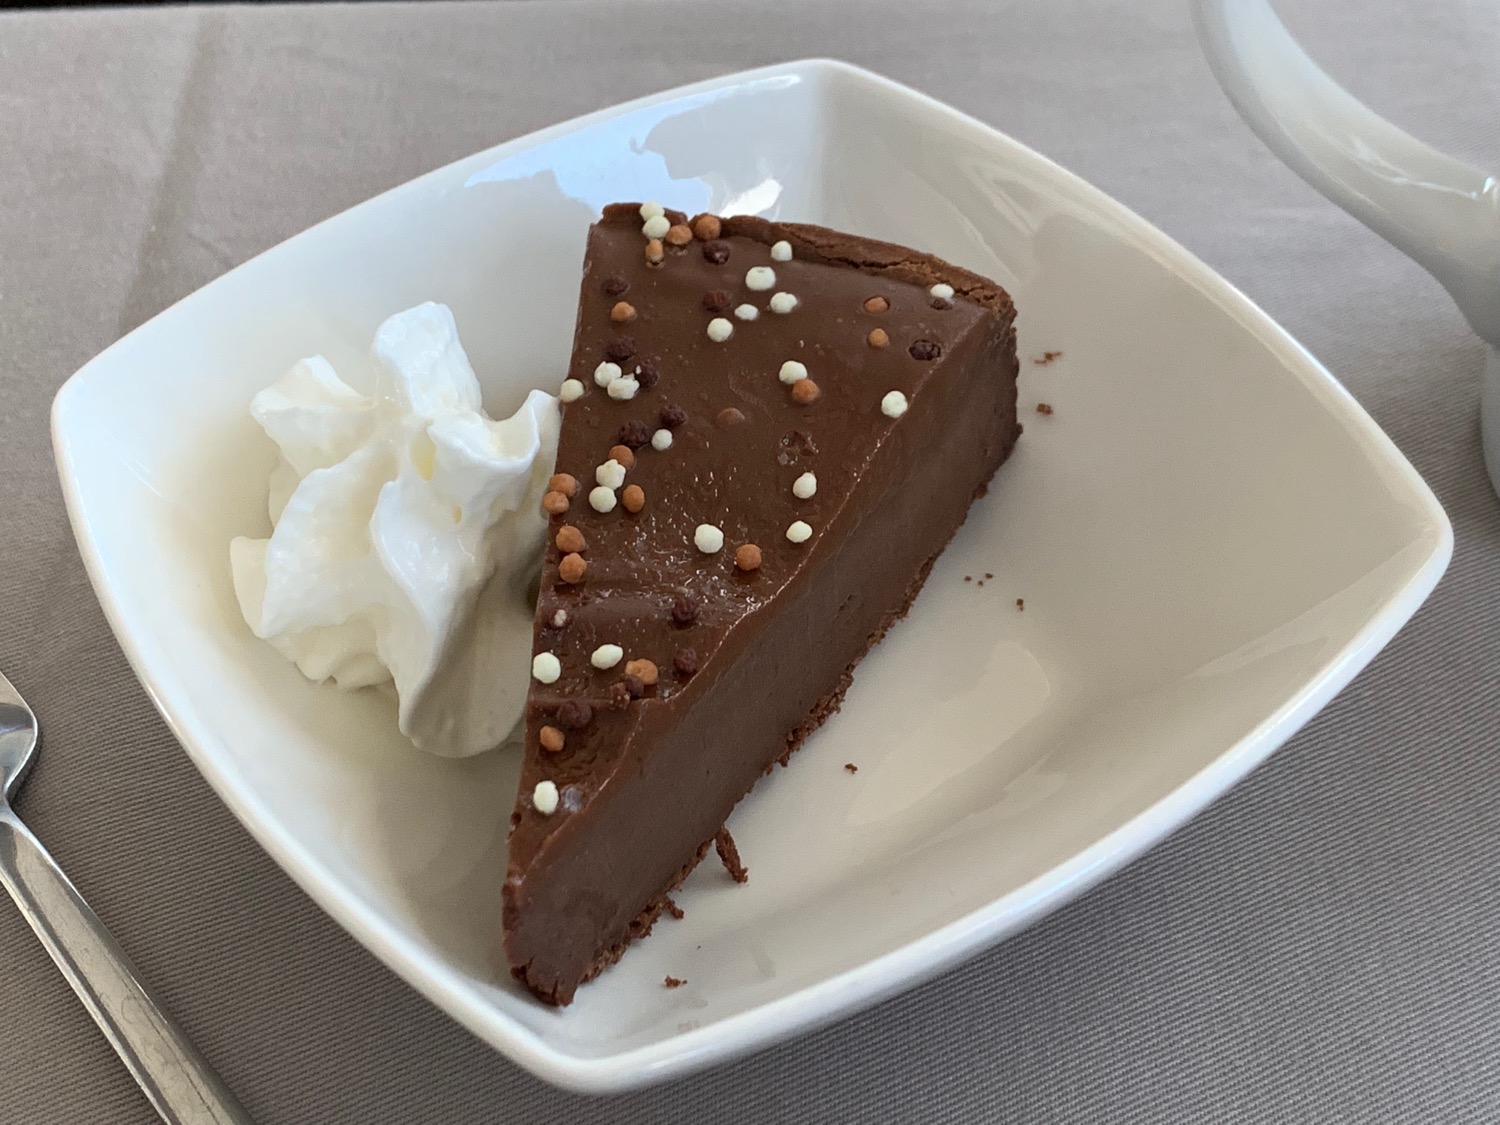 a slice of chocolate cake with whipped cream